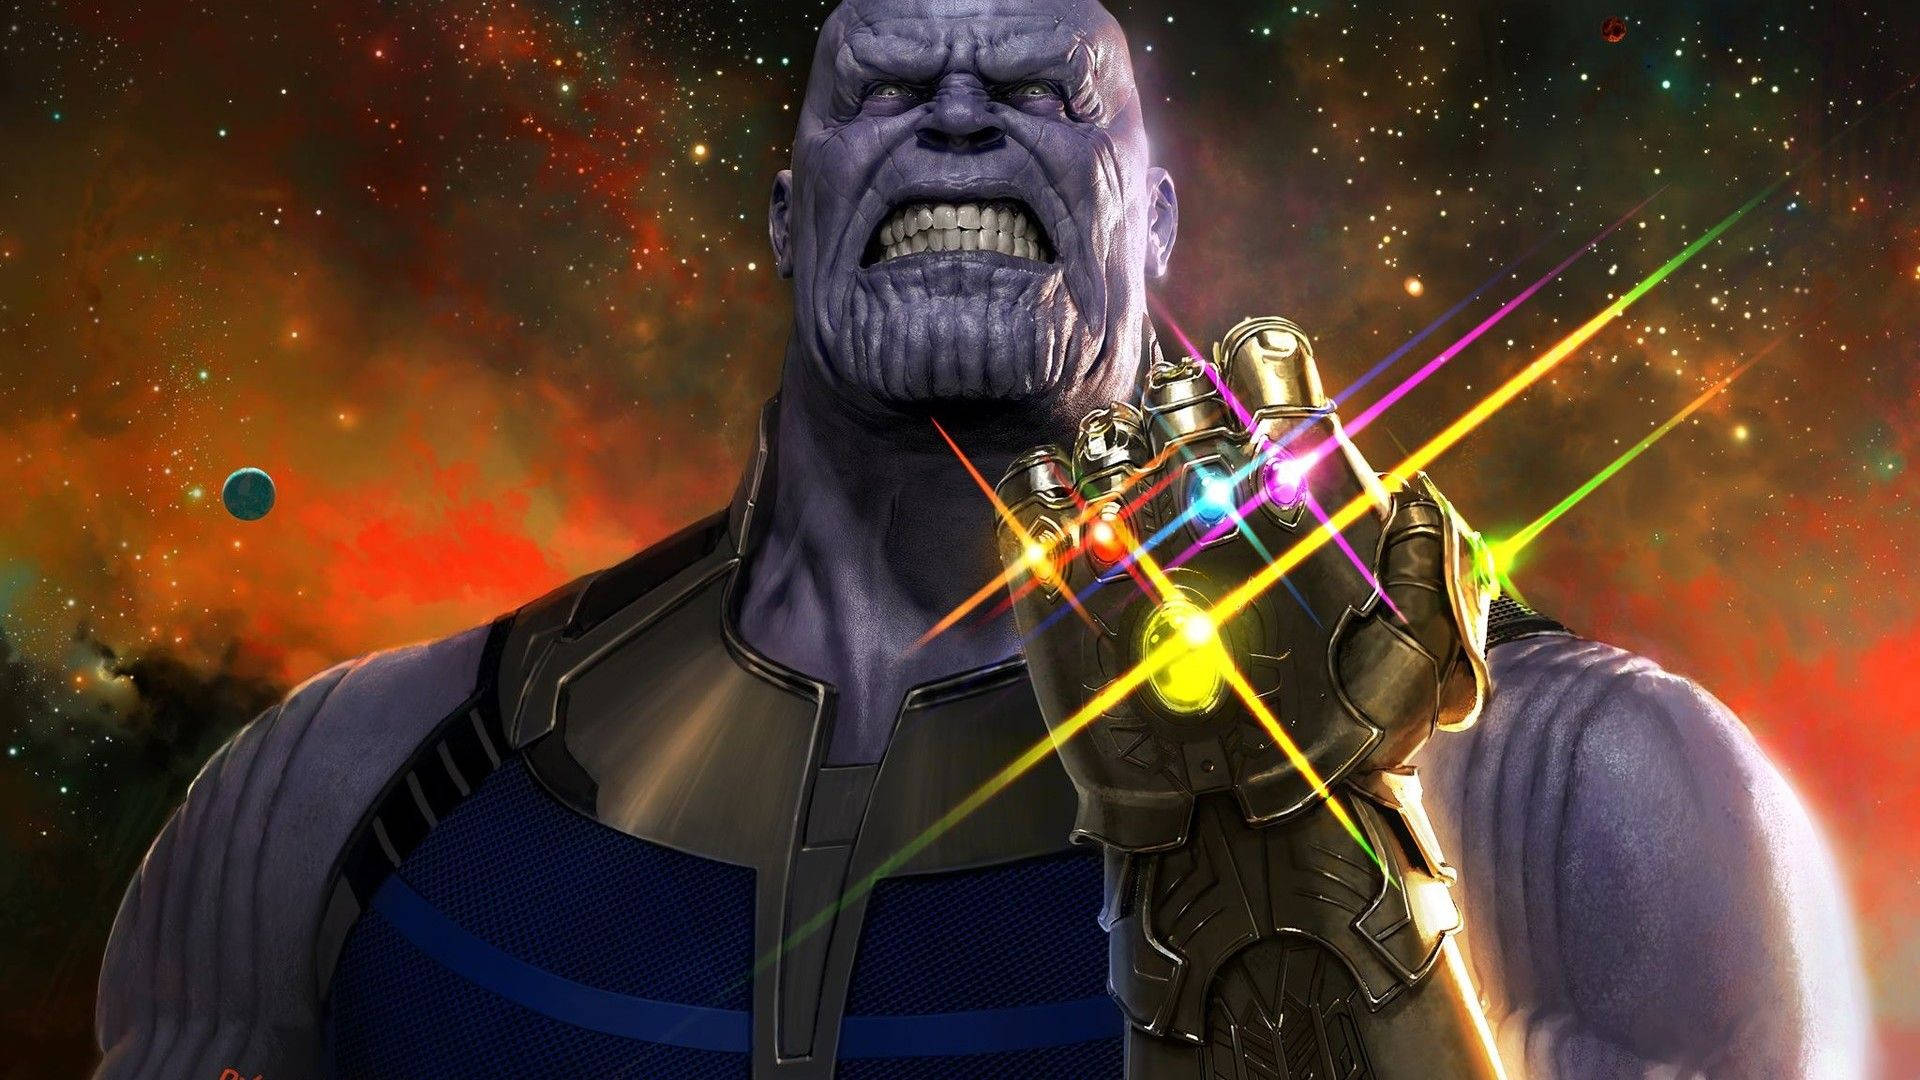 Marvel Villain Thanos is a prominent figure in the Avengers franchise Wallpaper